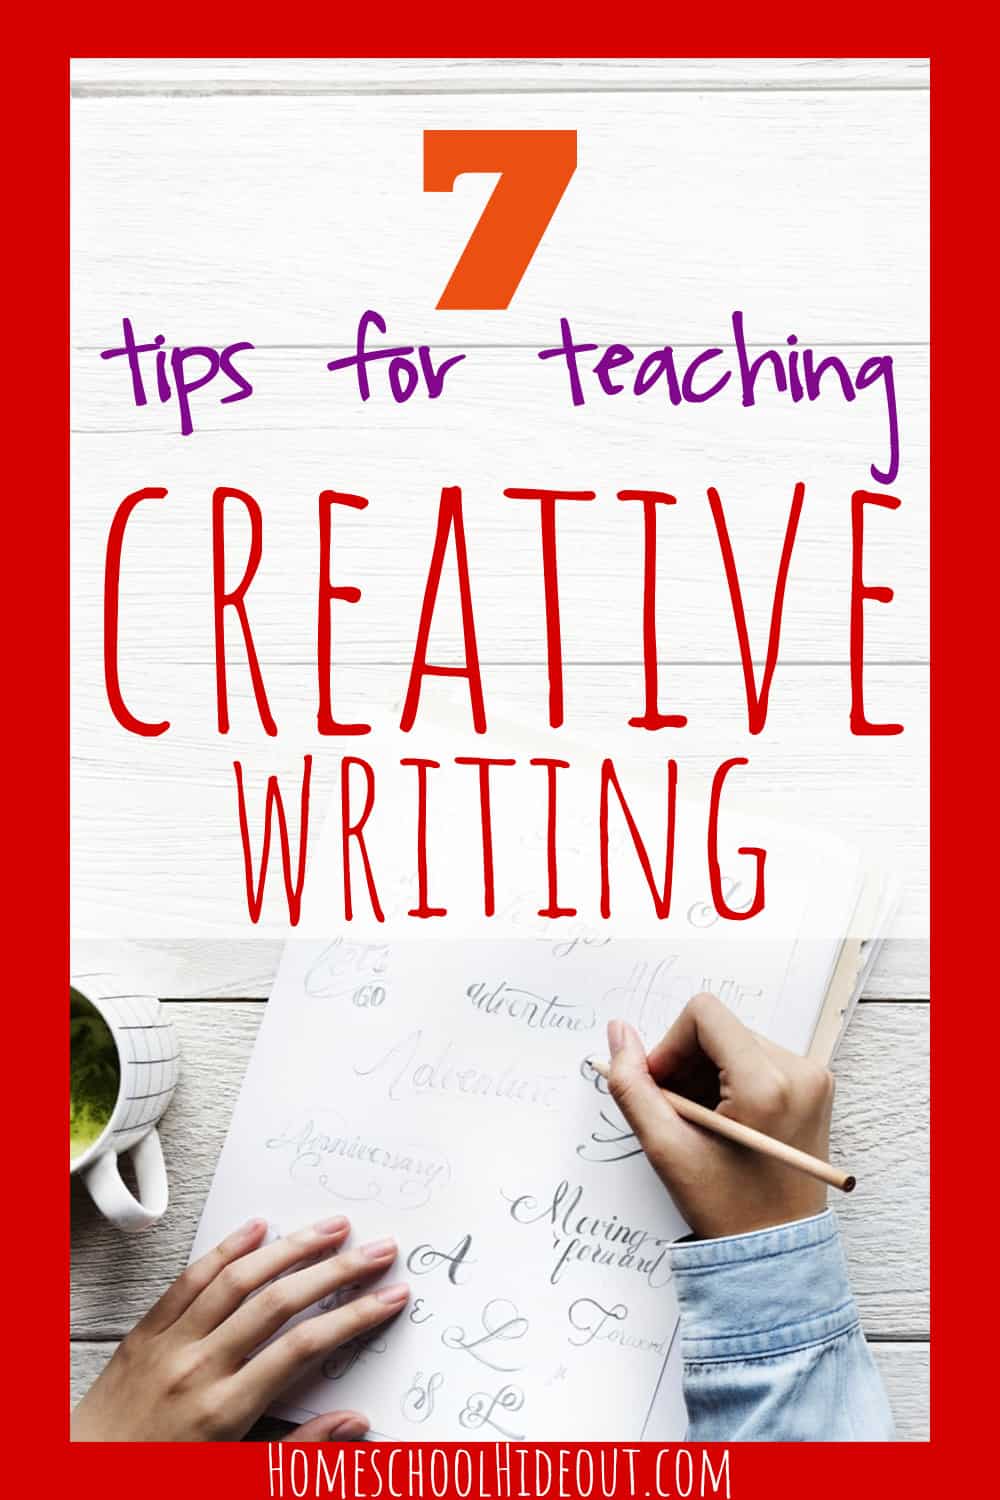 Teaching creative writing can be a stressful job but with these 7 tips, it's much easier! #homeschool #creativewriting #writing #athomed #teenagehomeschoolers